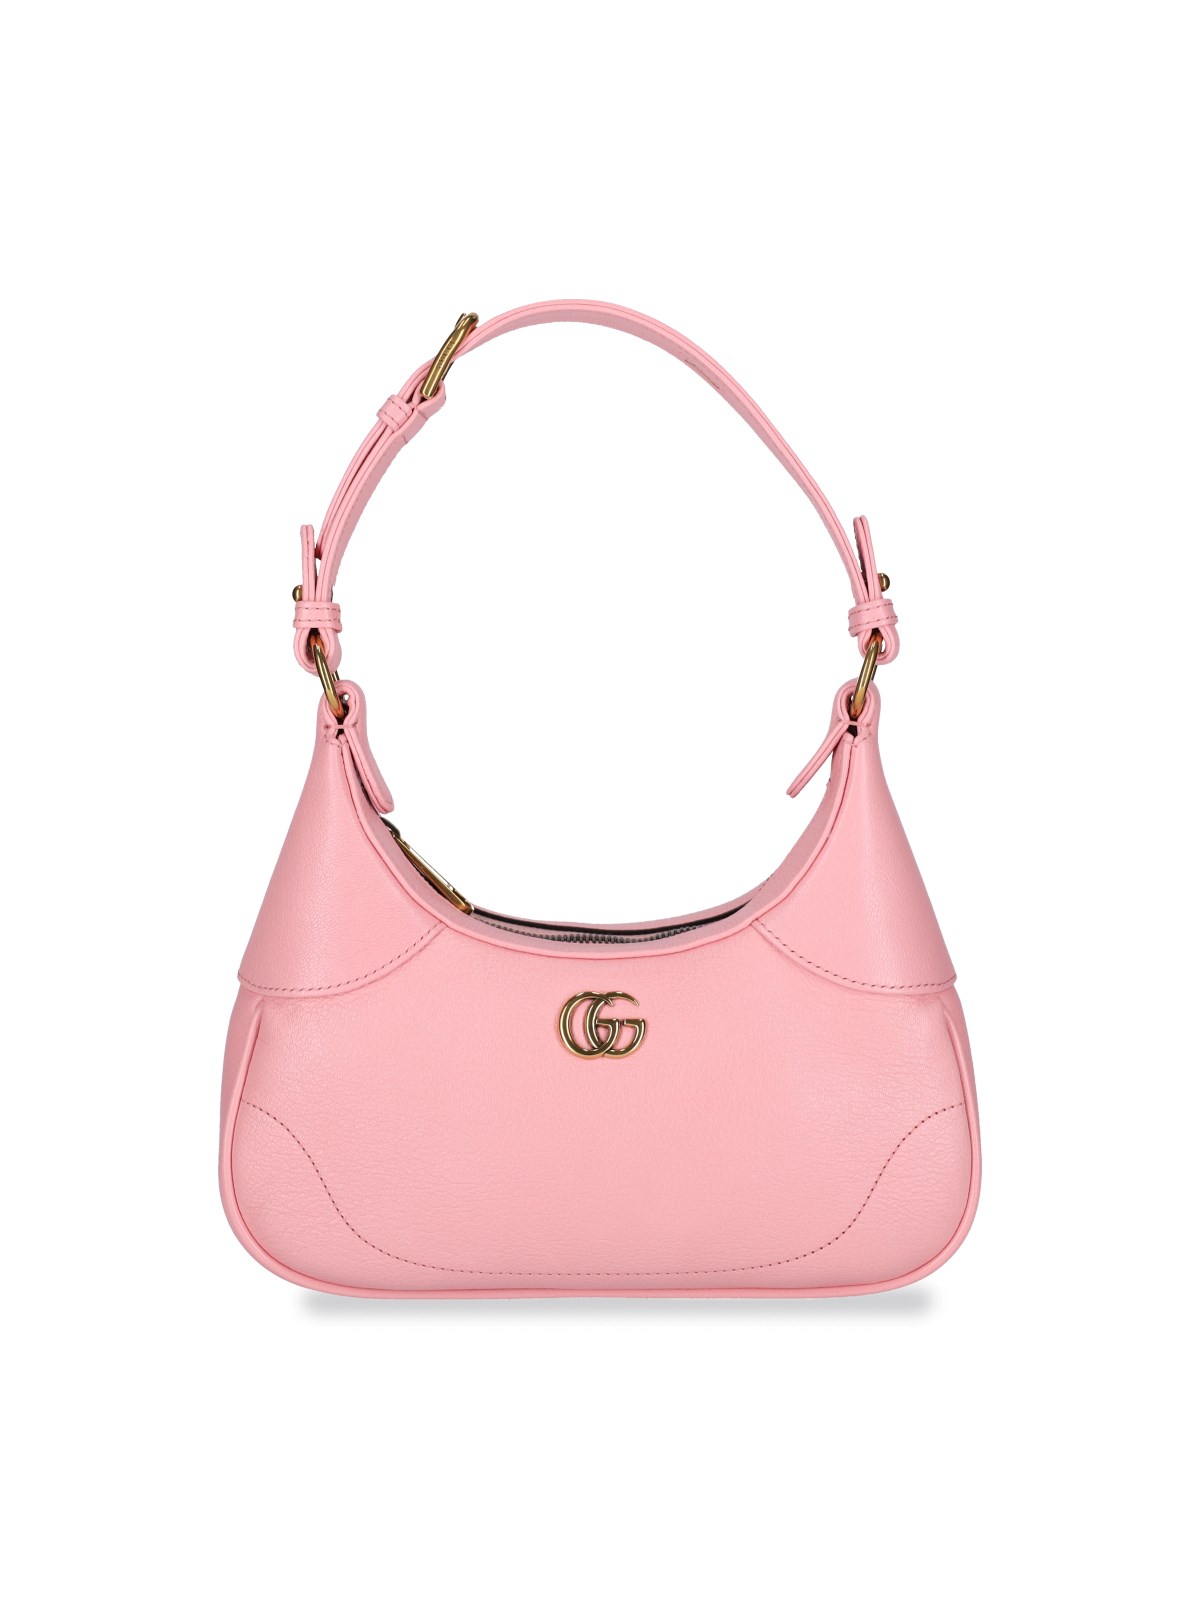 Gucci Aphrodite Small Leather Shoulder Bag In Rosa